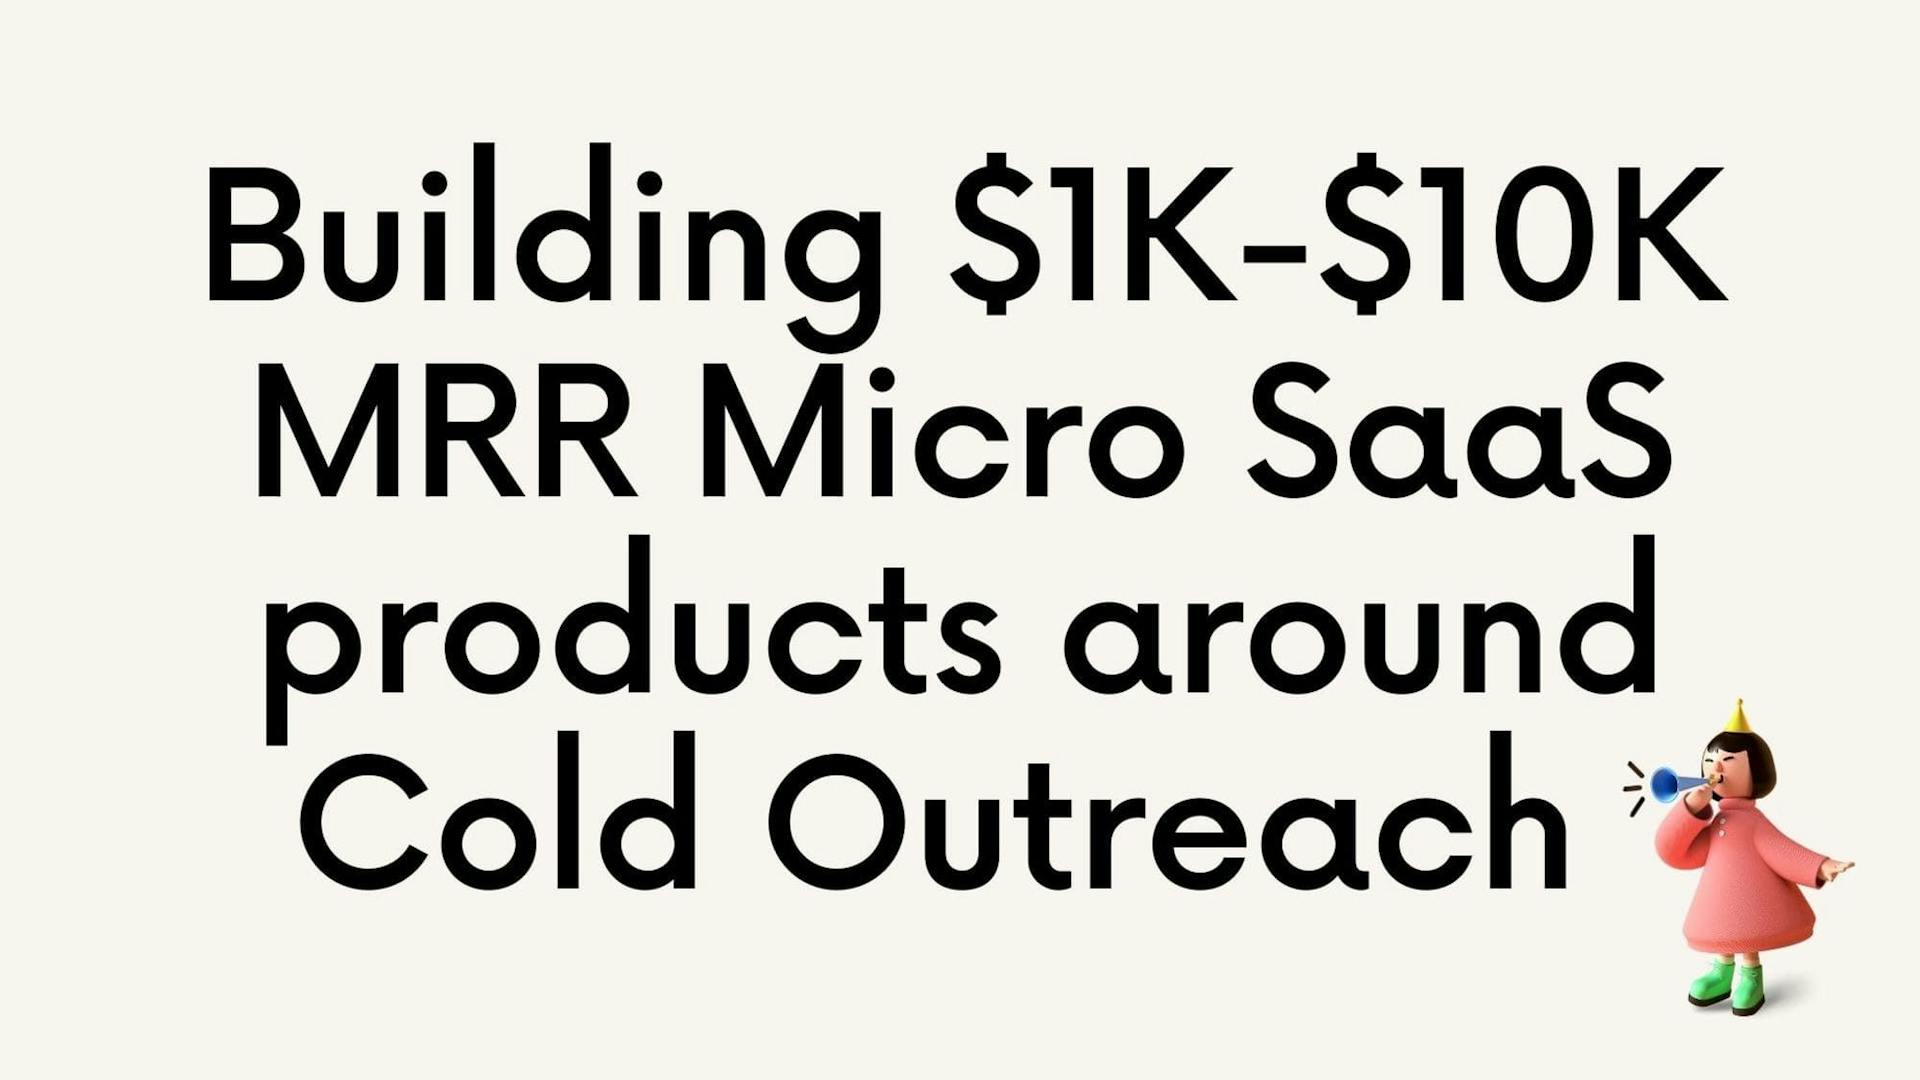 Cover Image for 3 Micro SaaS Ideas around Cold Outreach